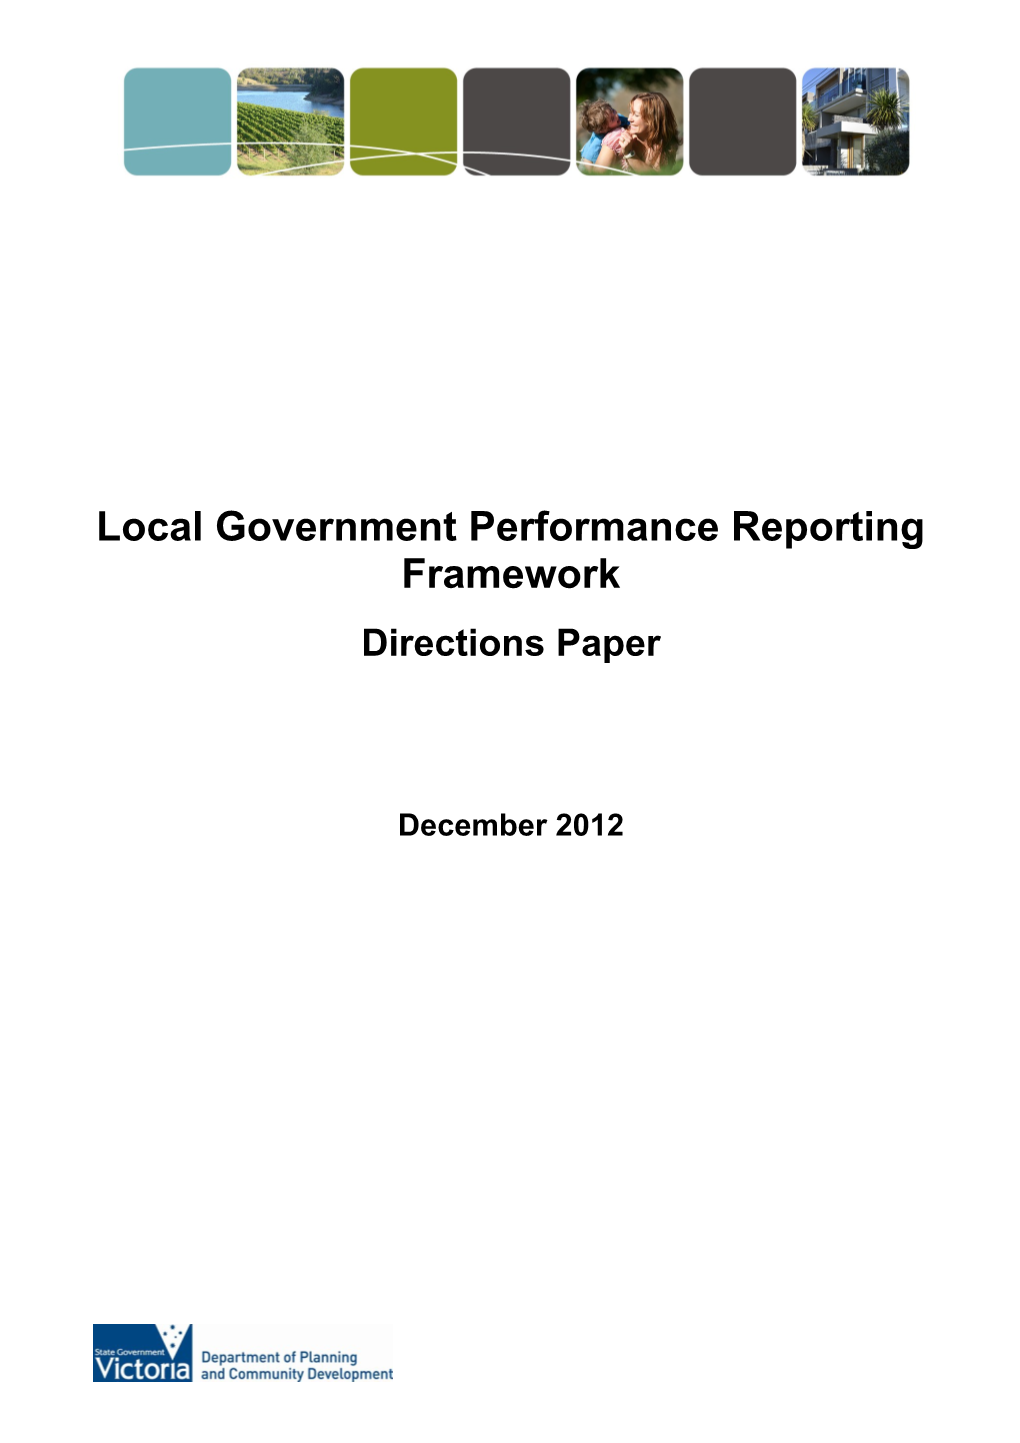 Local Government Performance Reporting Framework